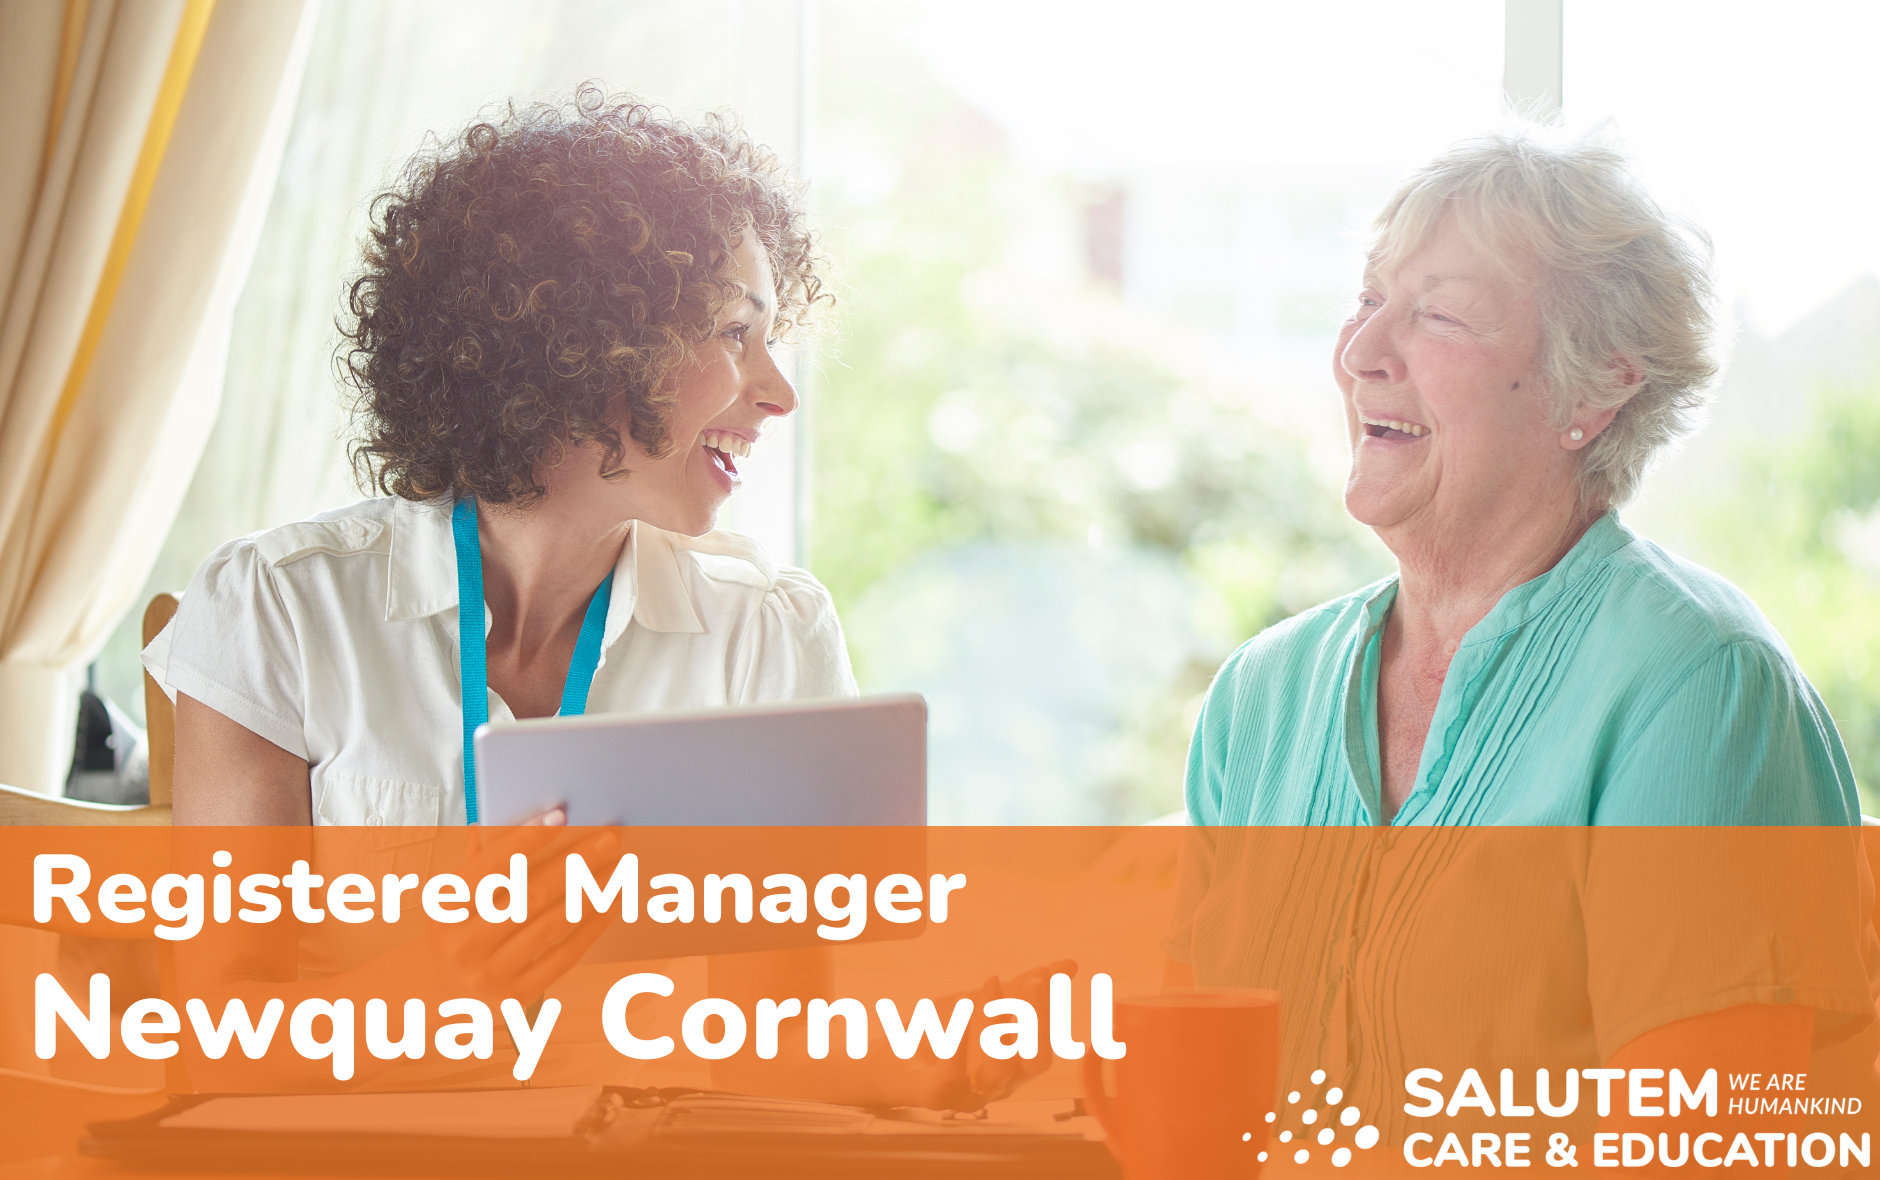 Registered Manager Newquay Cornwall